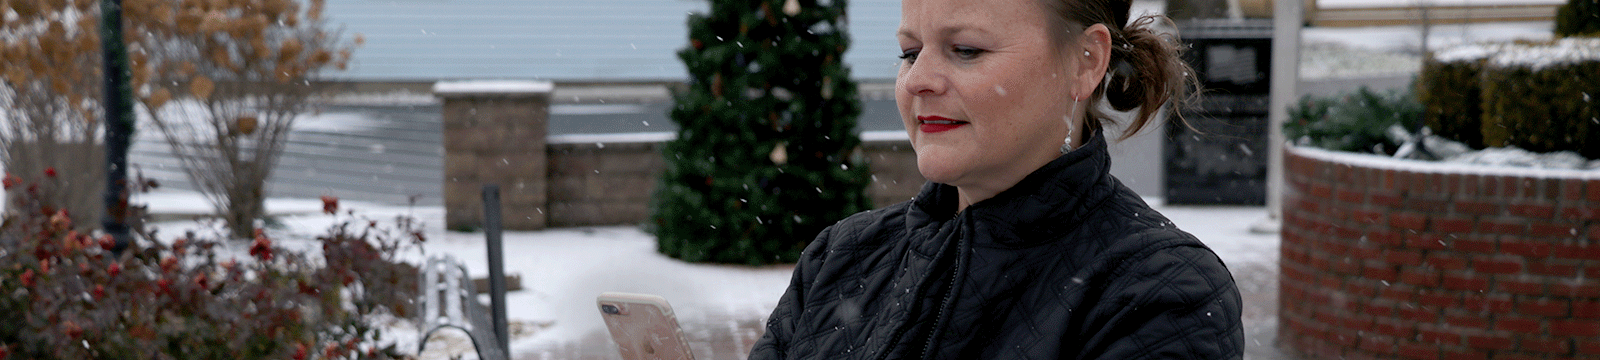 Woman looking at her digital banking on a smartphone outside in the snow. A decorated Christmas tree is in the background.